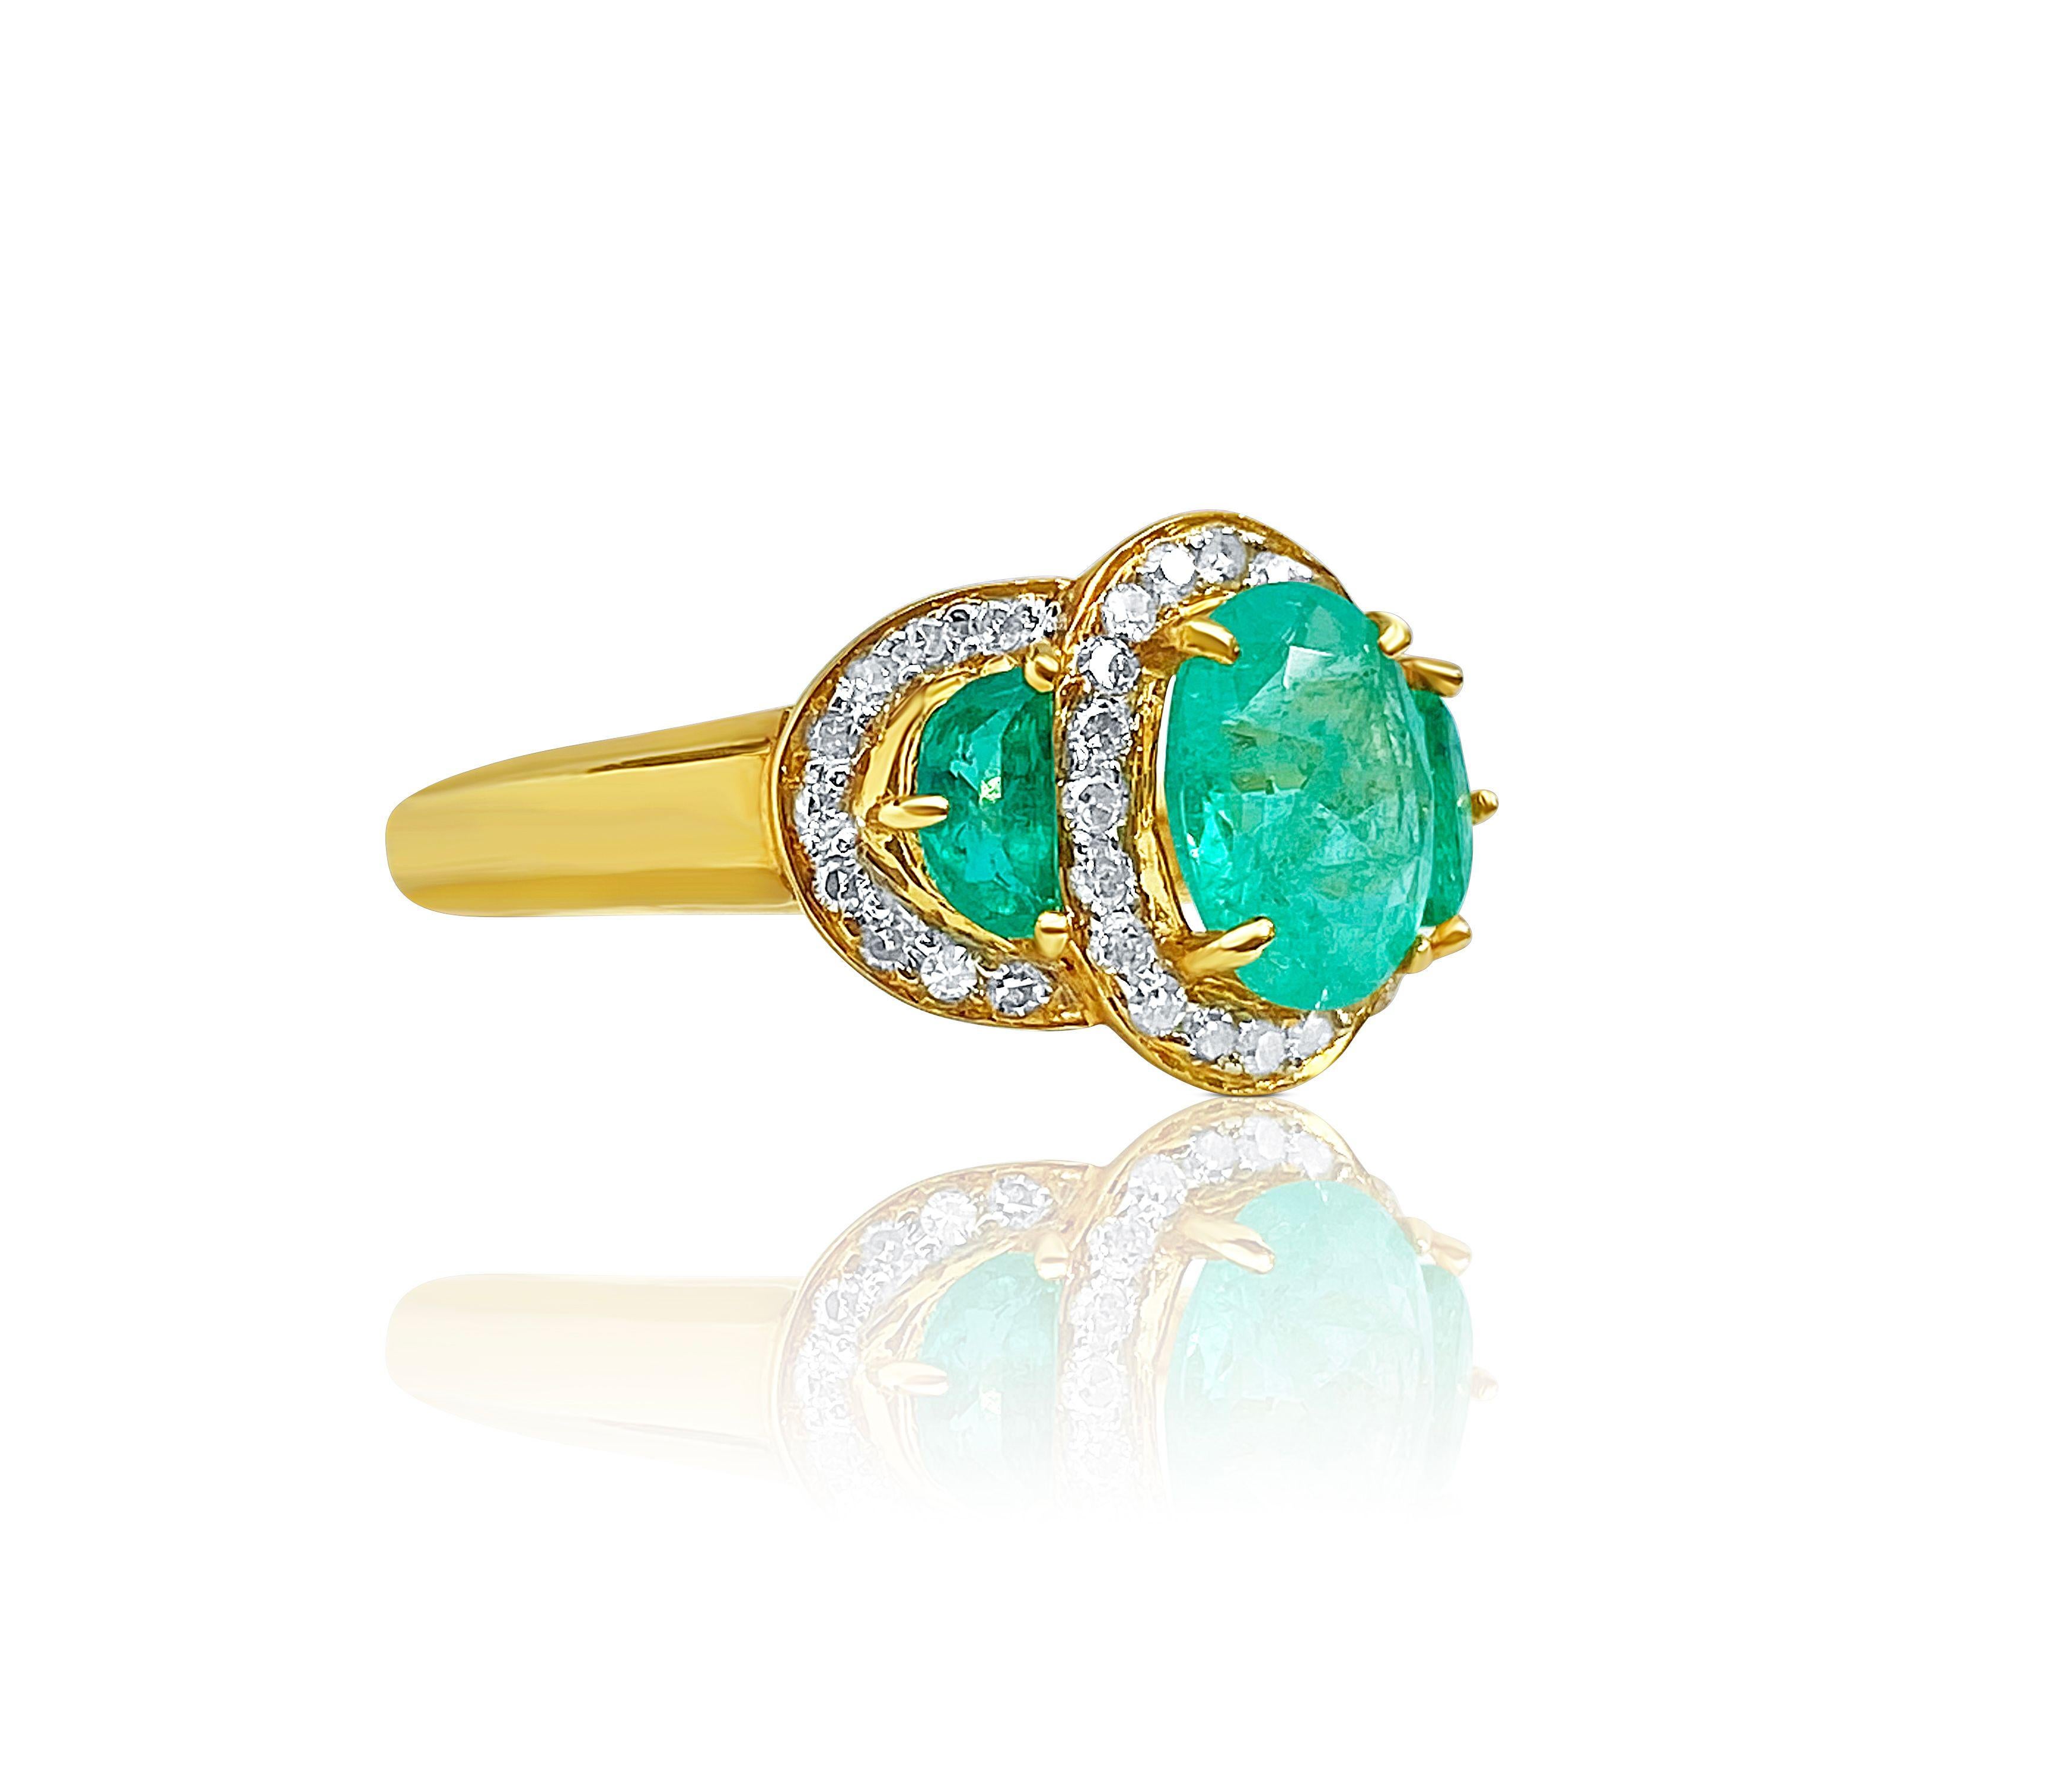 Centering a 1.10 Carat Oval-Cut Colombian Emerald, flanked by two 0.25 Carat Half-Moon Cut Colombian Emeralds, accented by another 38 Round-Brilliant Cut White Diamonds, and set in vivid 18K Yellow Gold, this classic Emerald suite is ideal for the